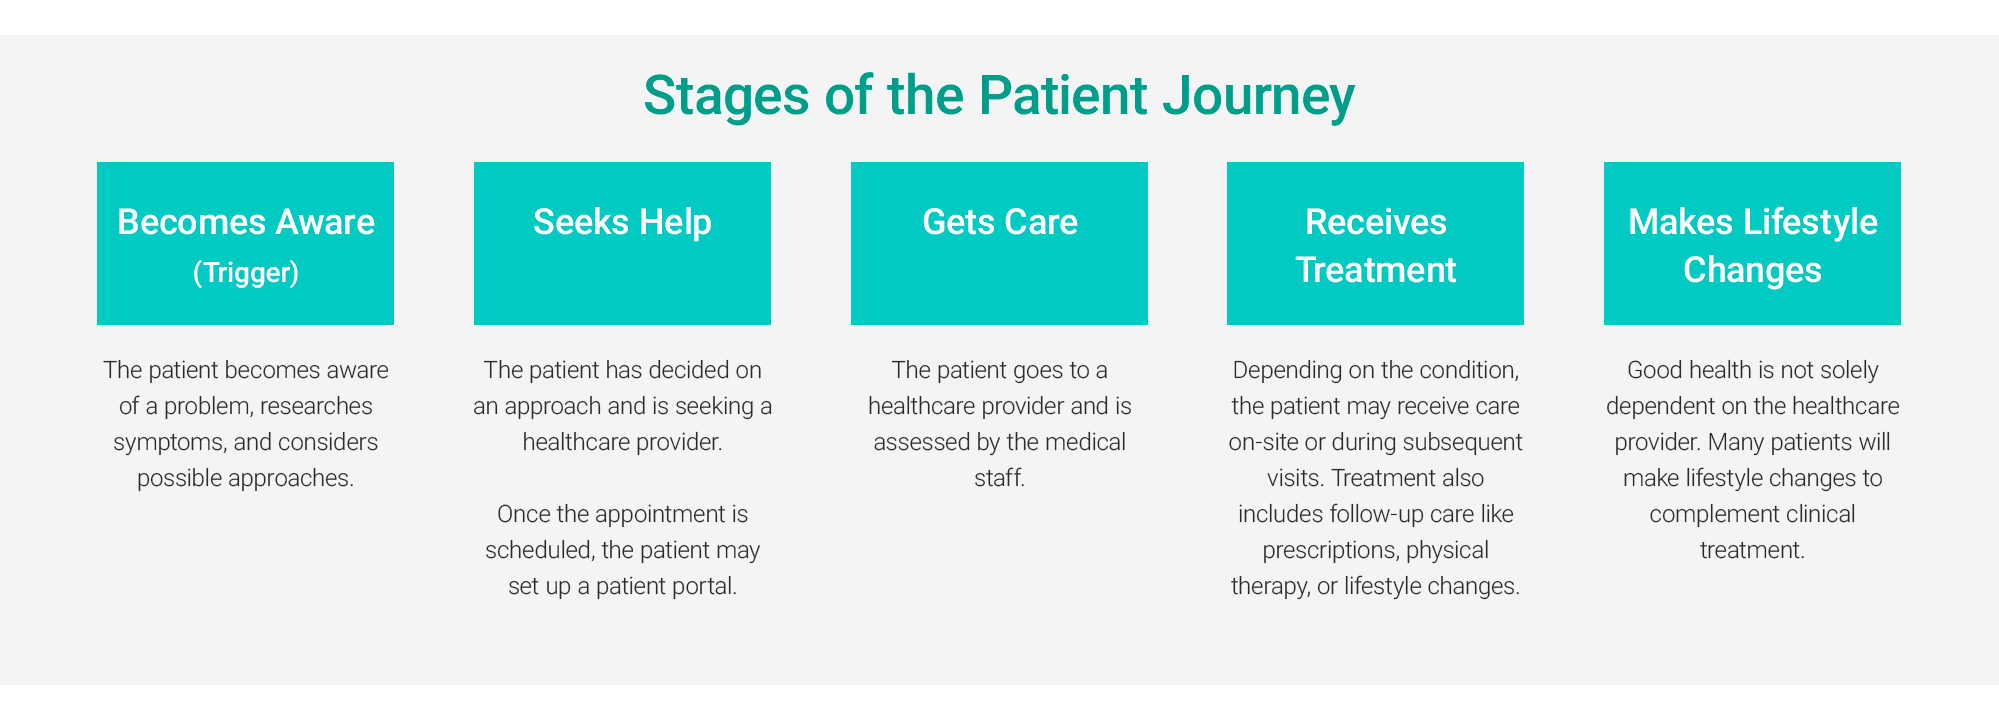 stages of the patient journey